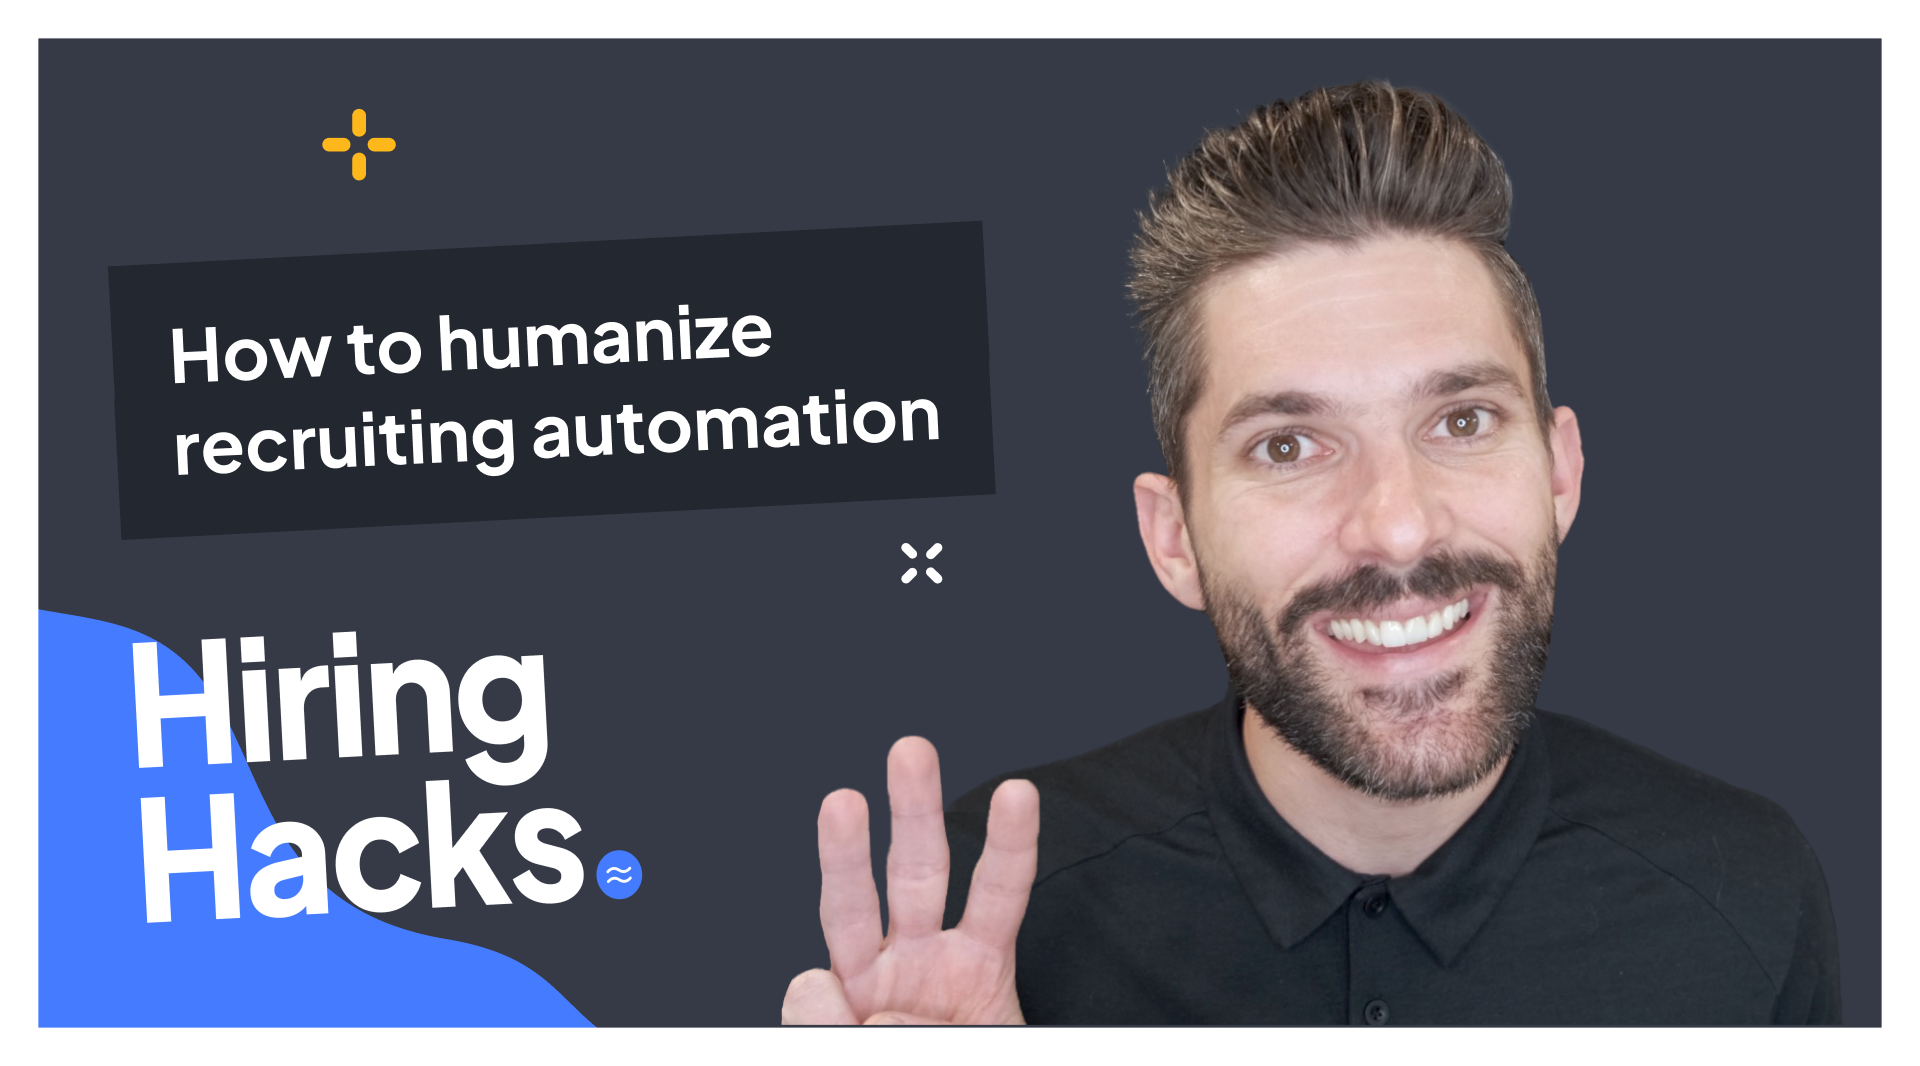 Hiring Hacks: How to humanize recruiting automation